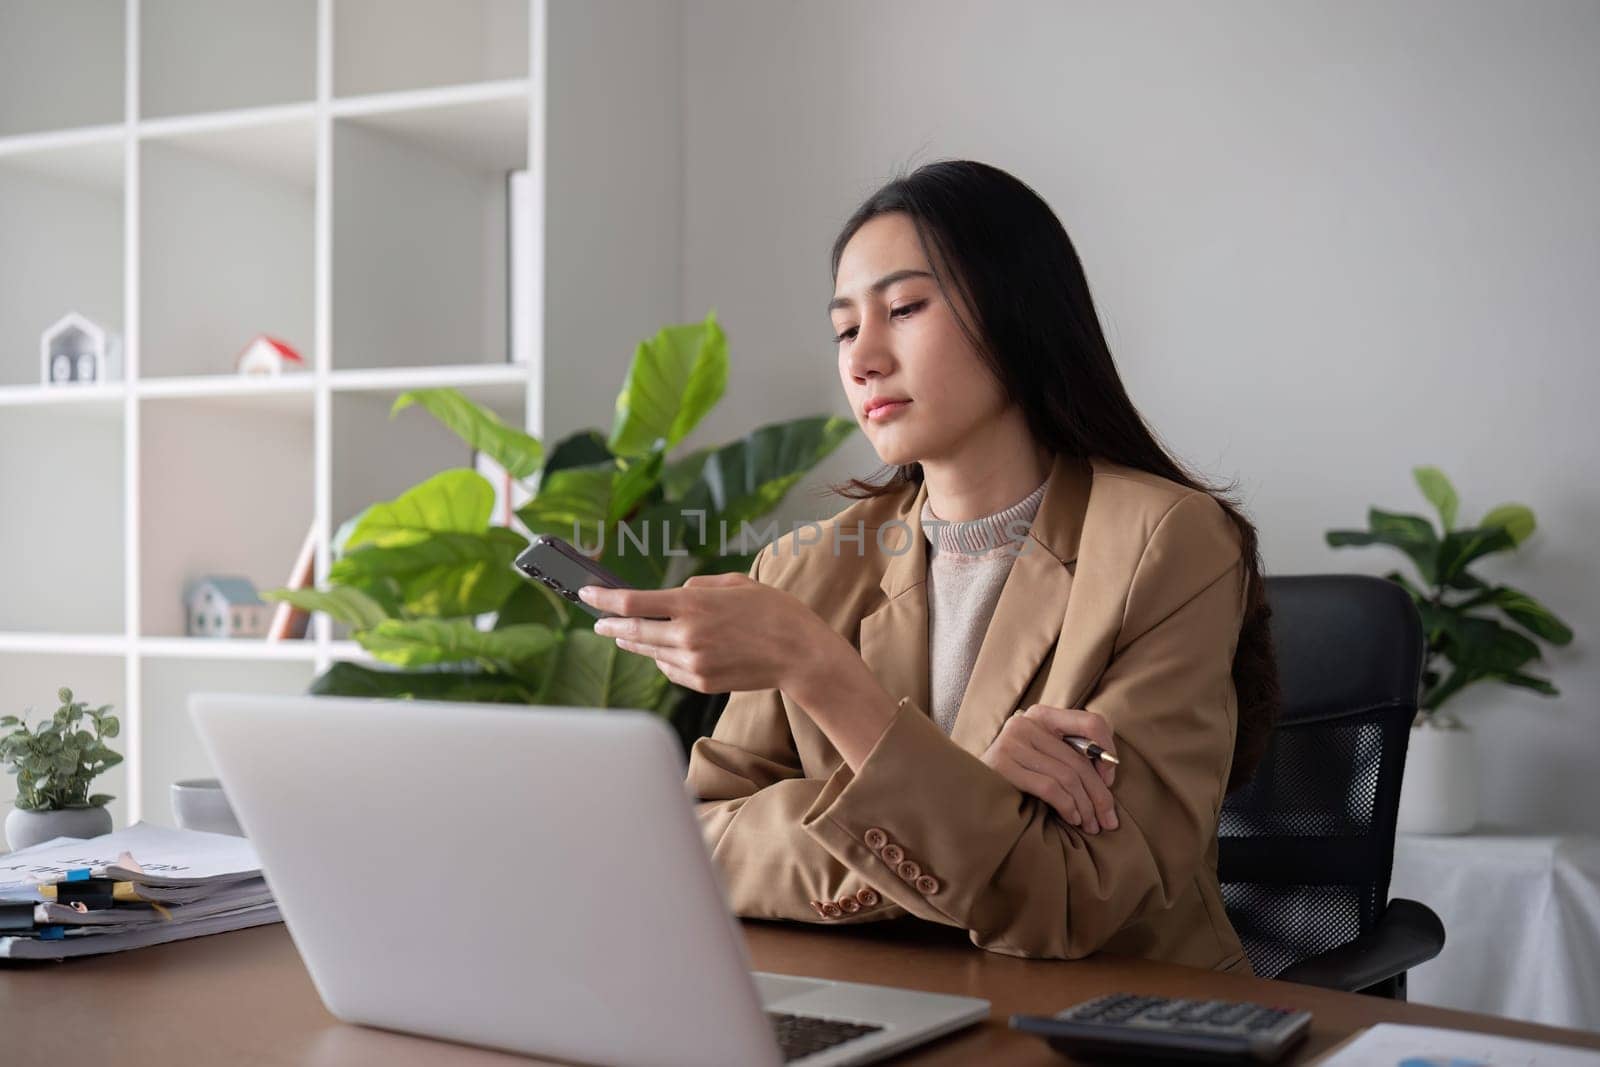 Unhappy Asian business woman shows stress over unsuccessful business while working in home office decorated with soothing green plants..